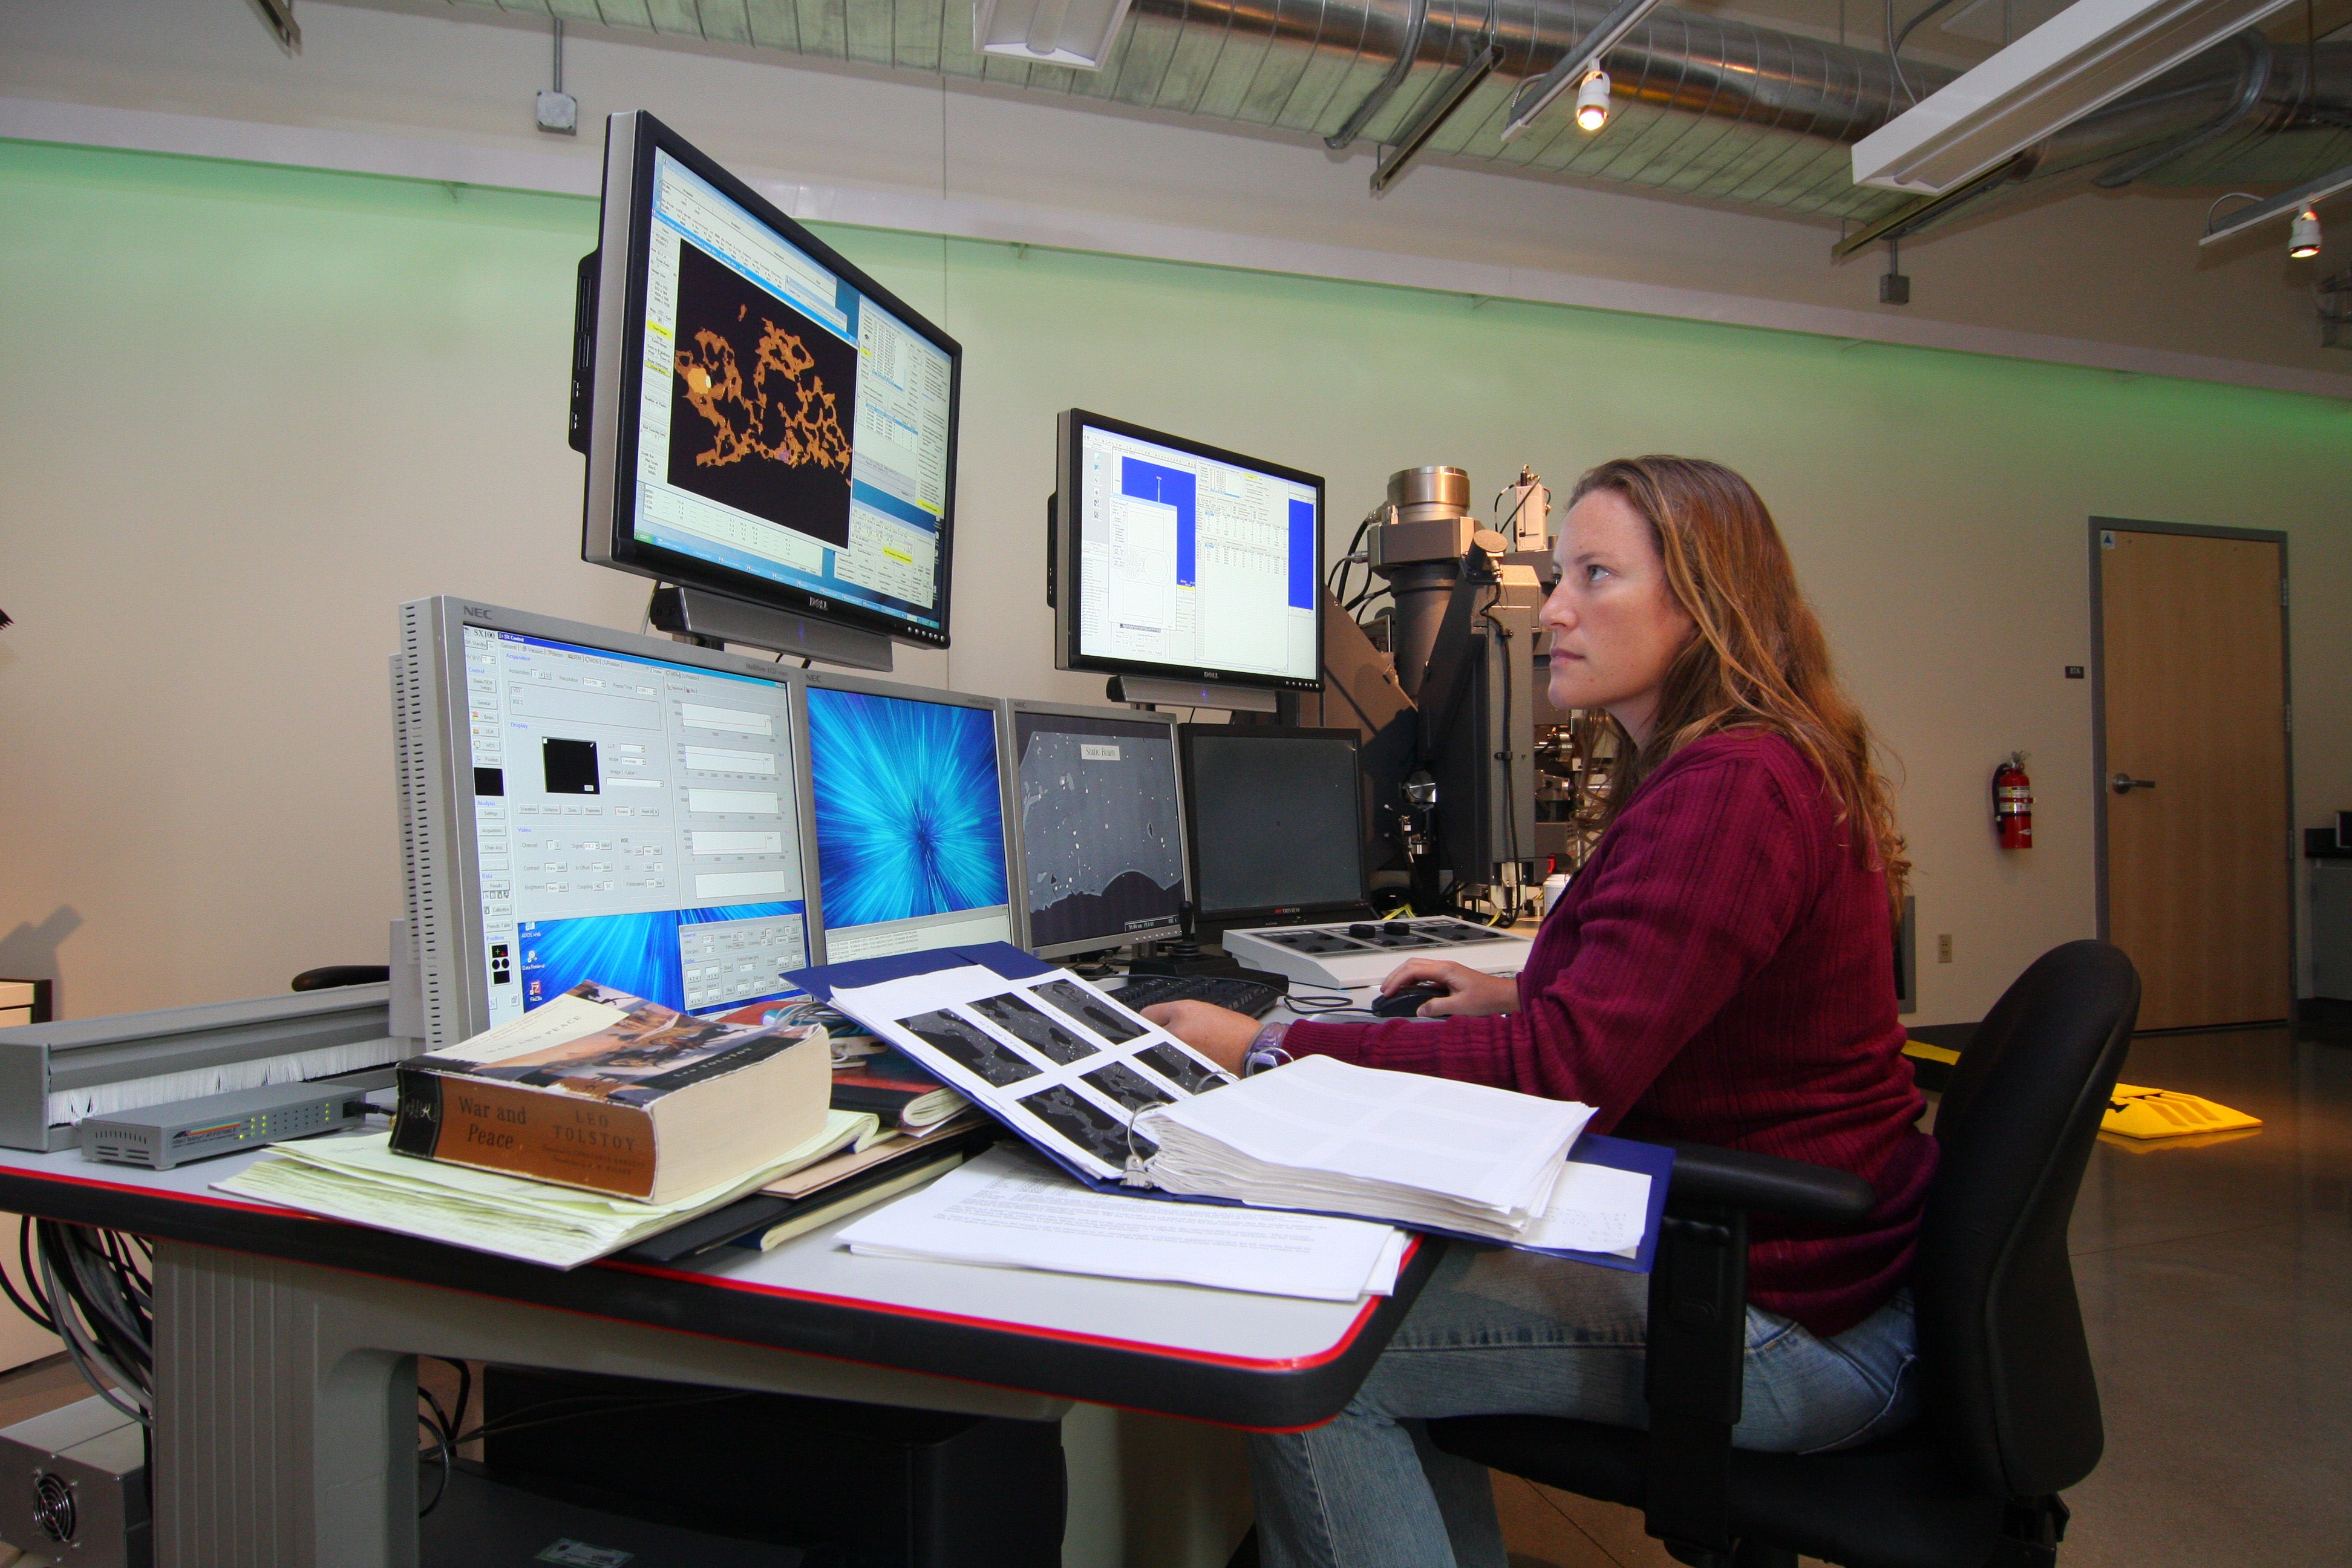 A woman sits at a computer station with multiple screens to compare data. There are open notebooks on the desk.